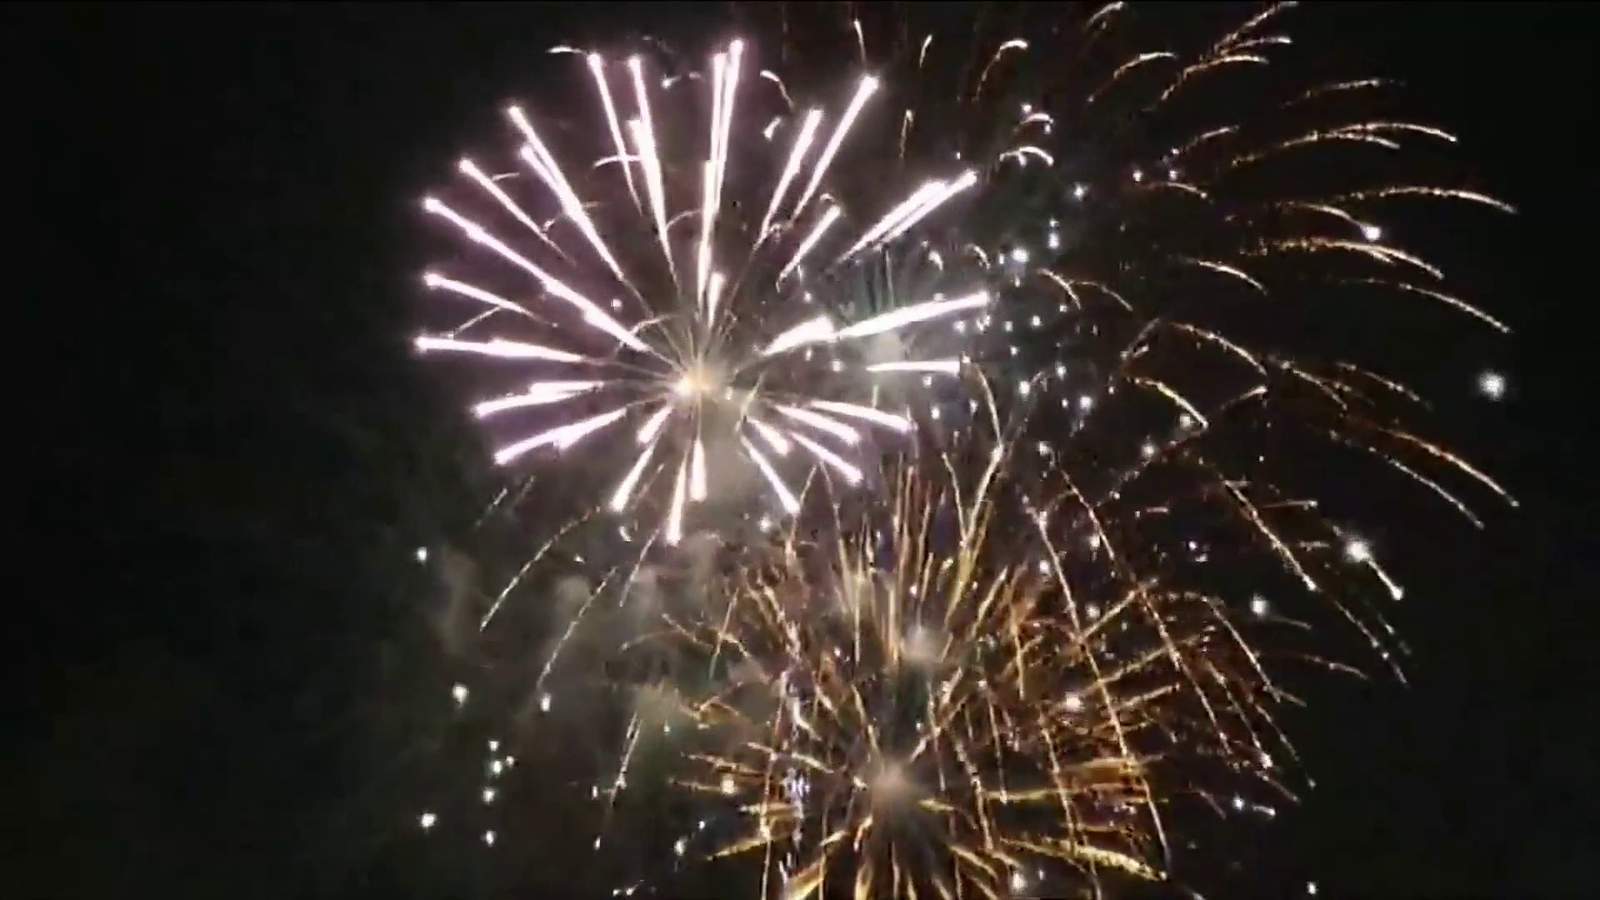 Will Jacksonville Beach have fireworks show this 4th of July?